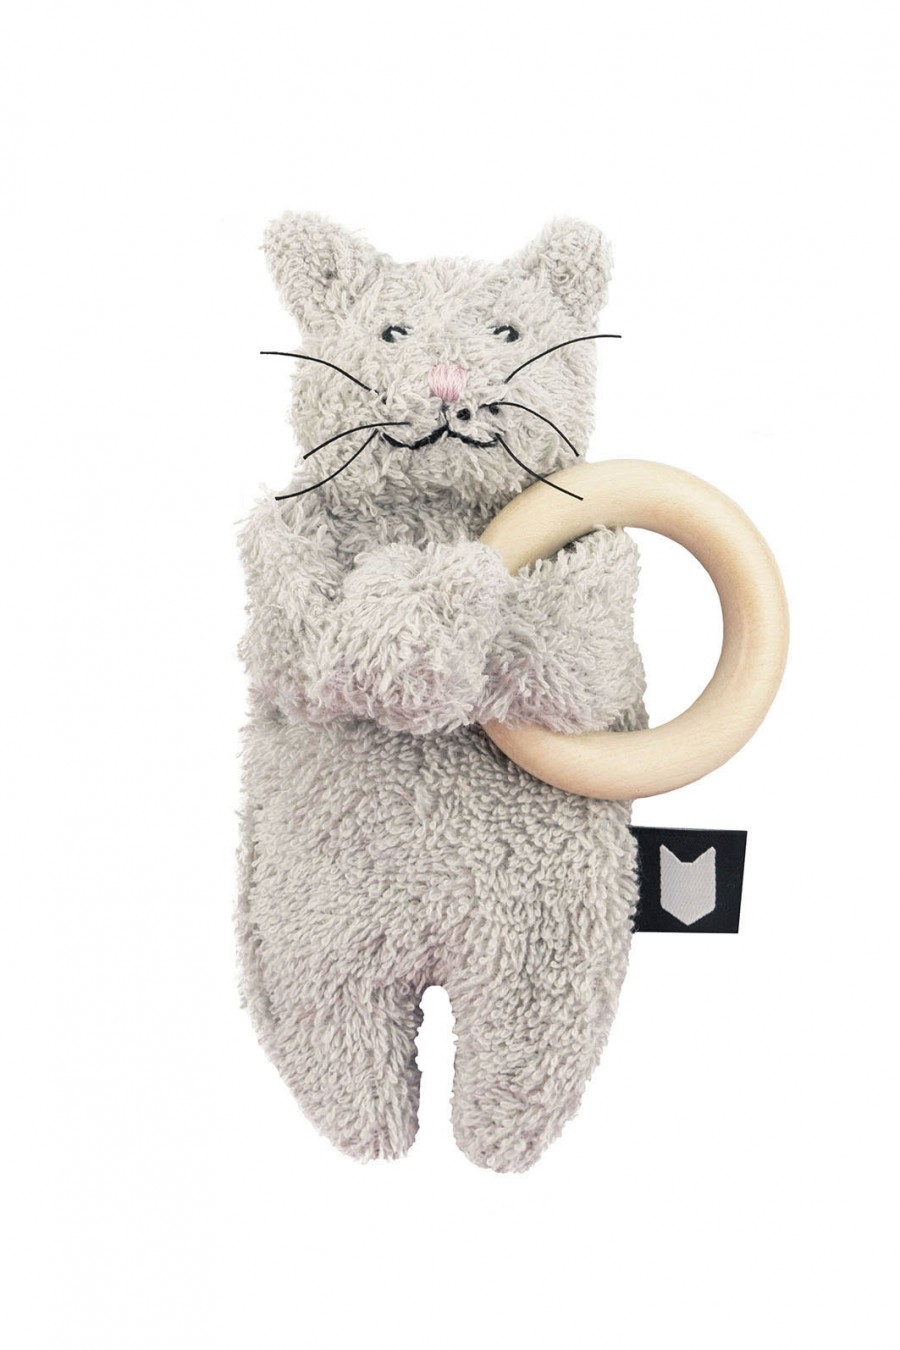 Kitty soft toy with wooden teether ROT0003